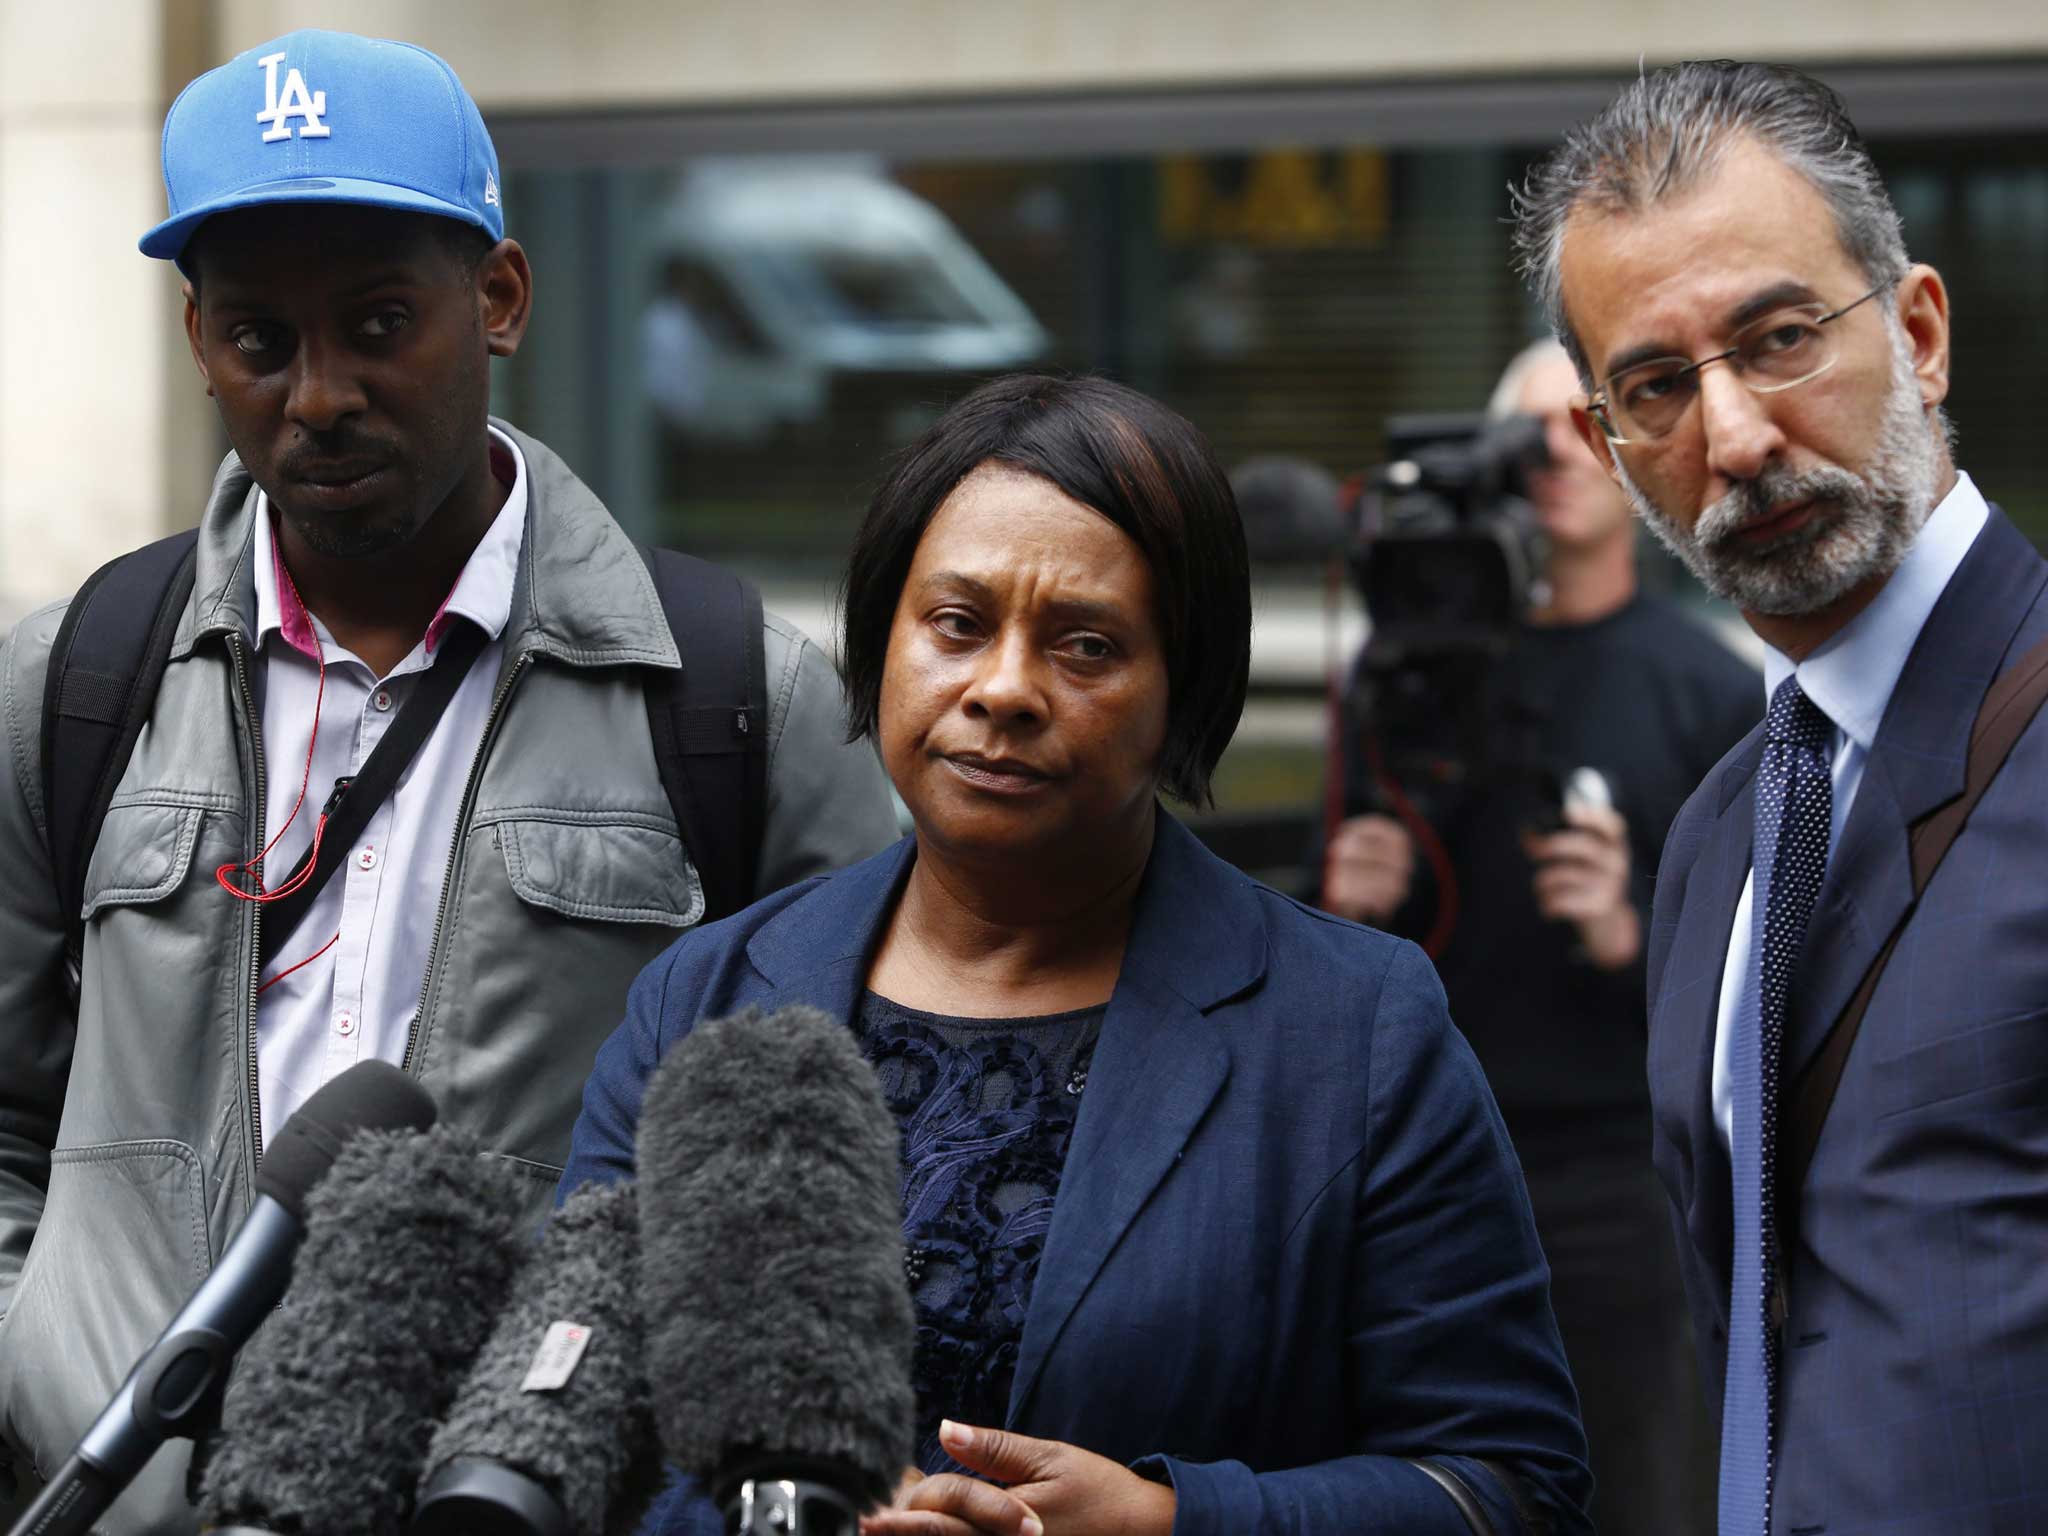 Doreen Lawrence demanded answers today after meeting Home Secretary Theresa May